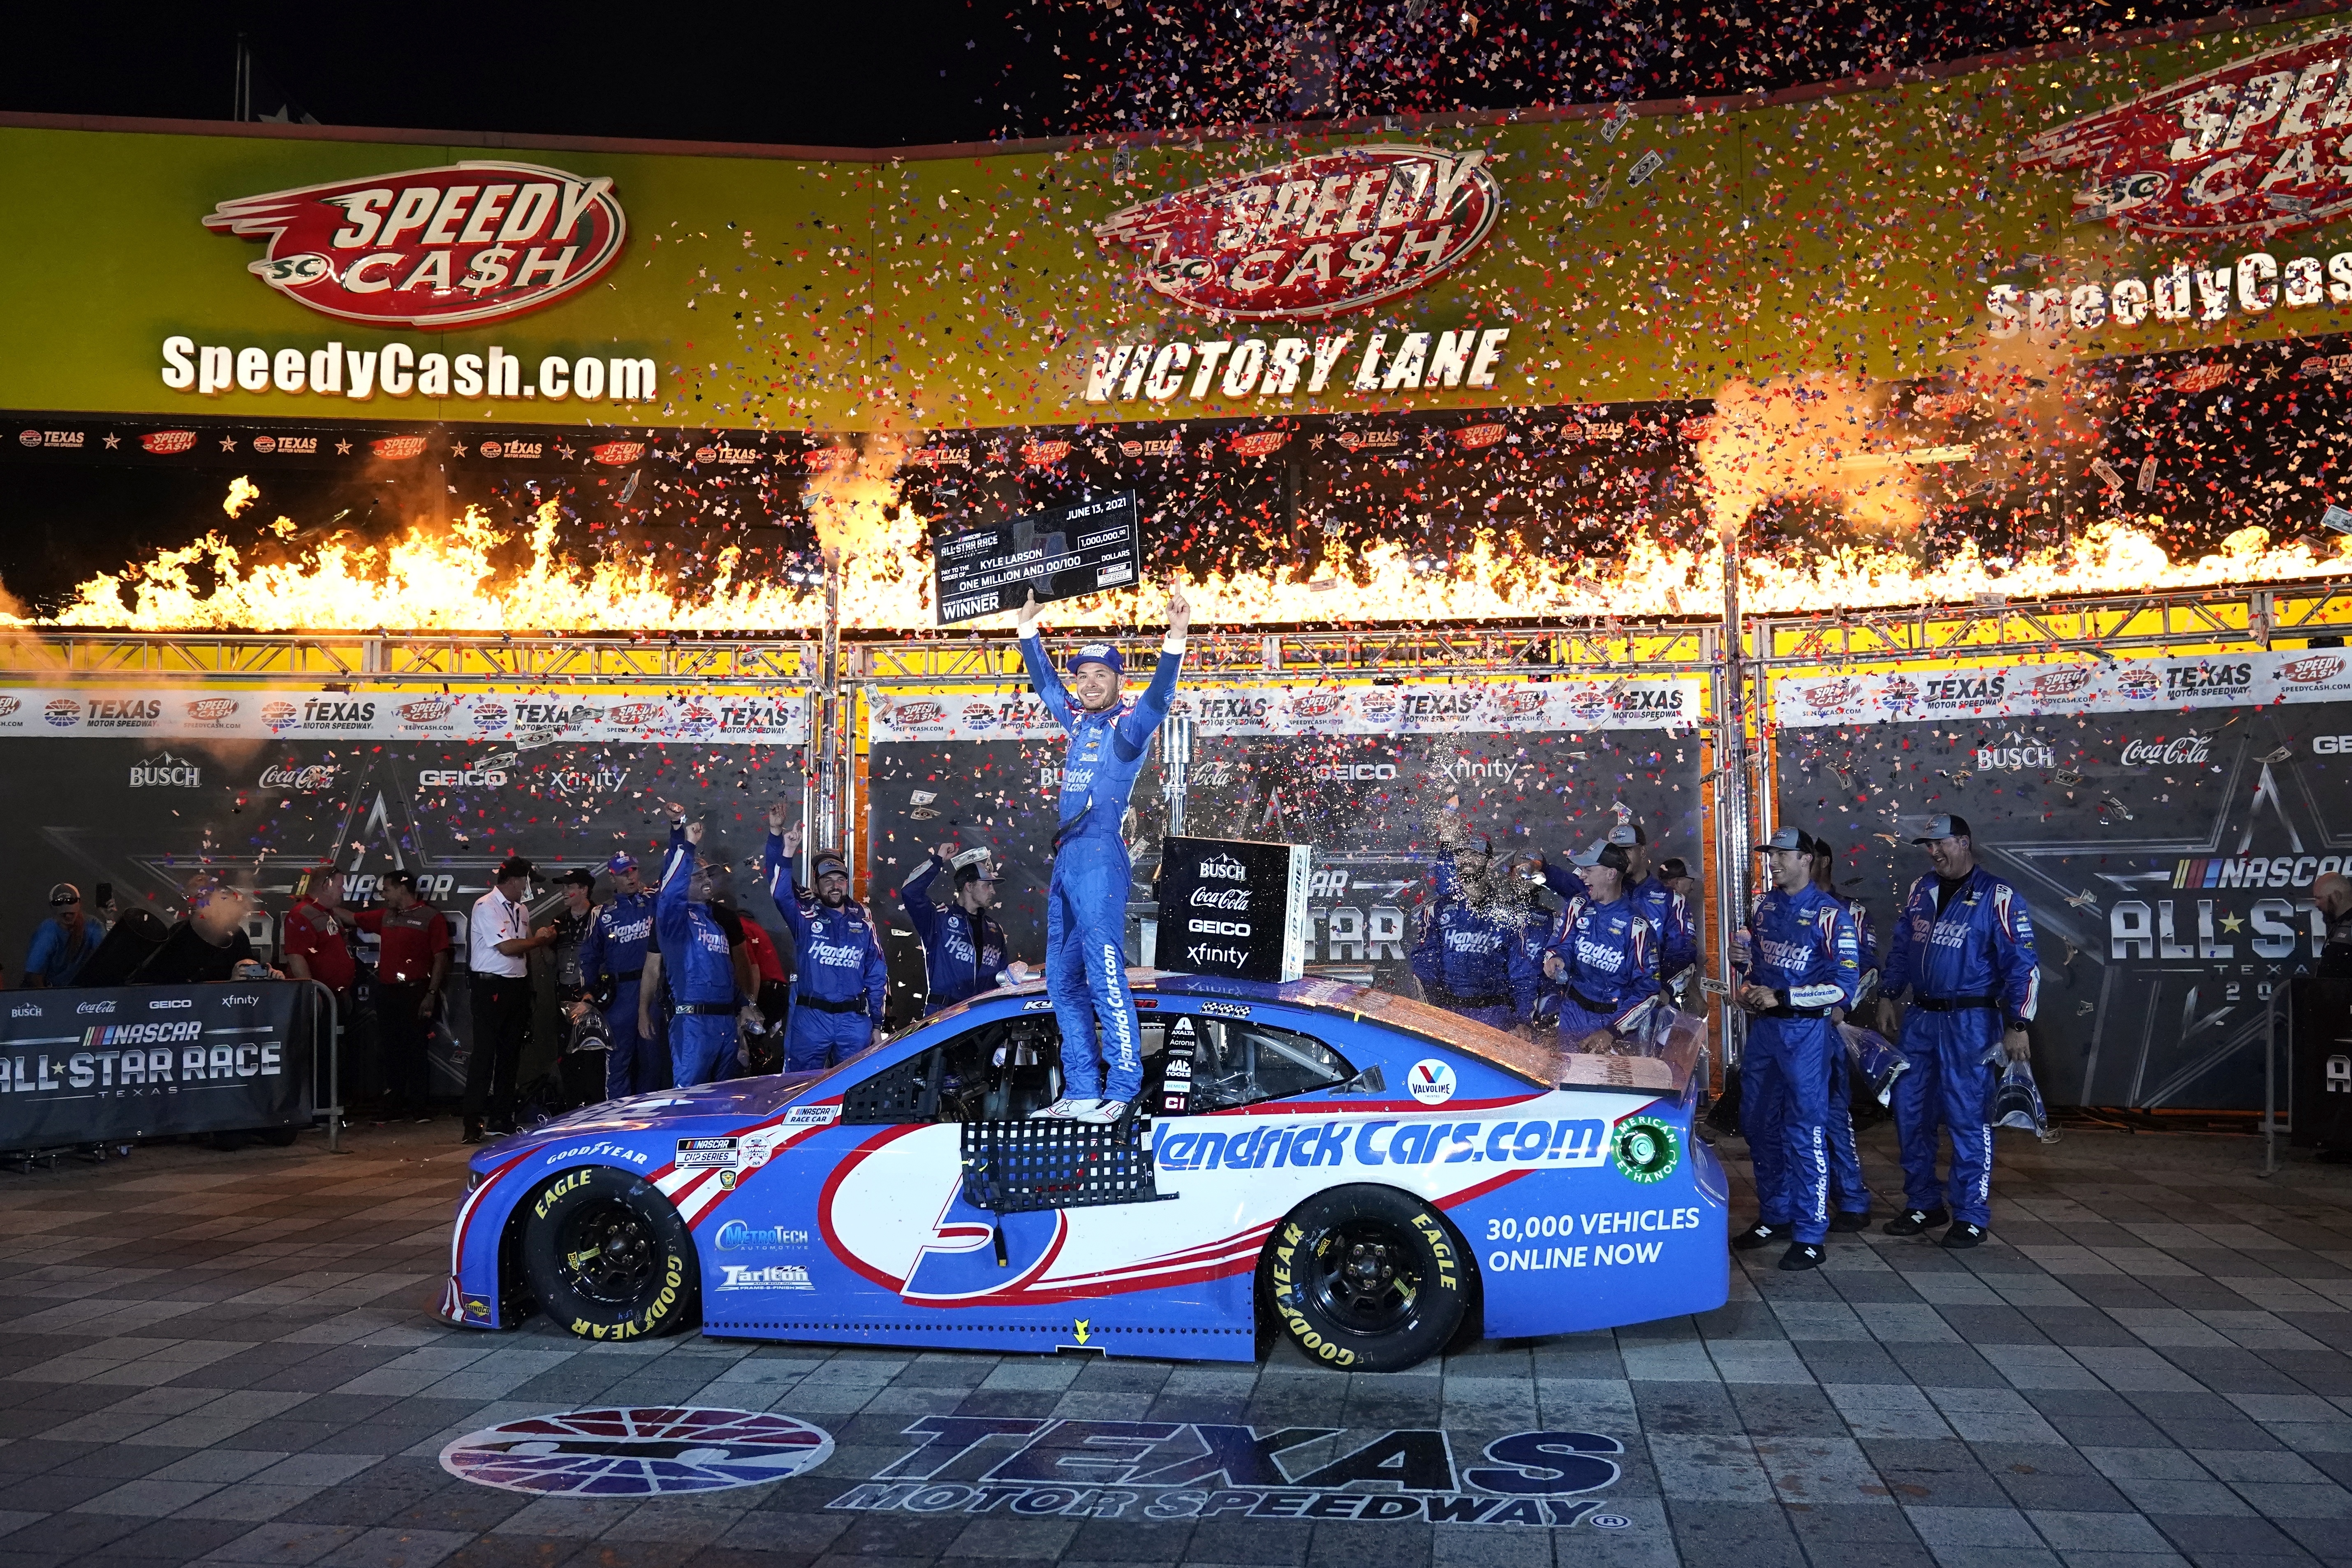 Larson wins 2nd NASCAR All-Star race, this one in Texas